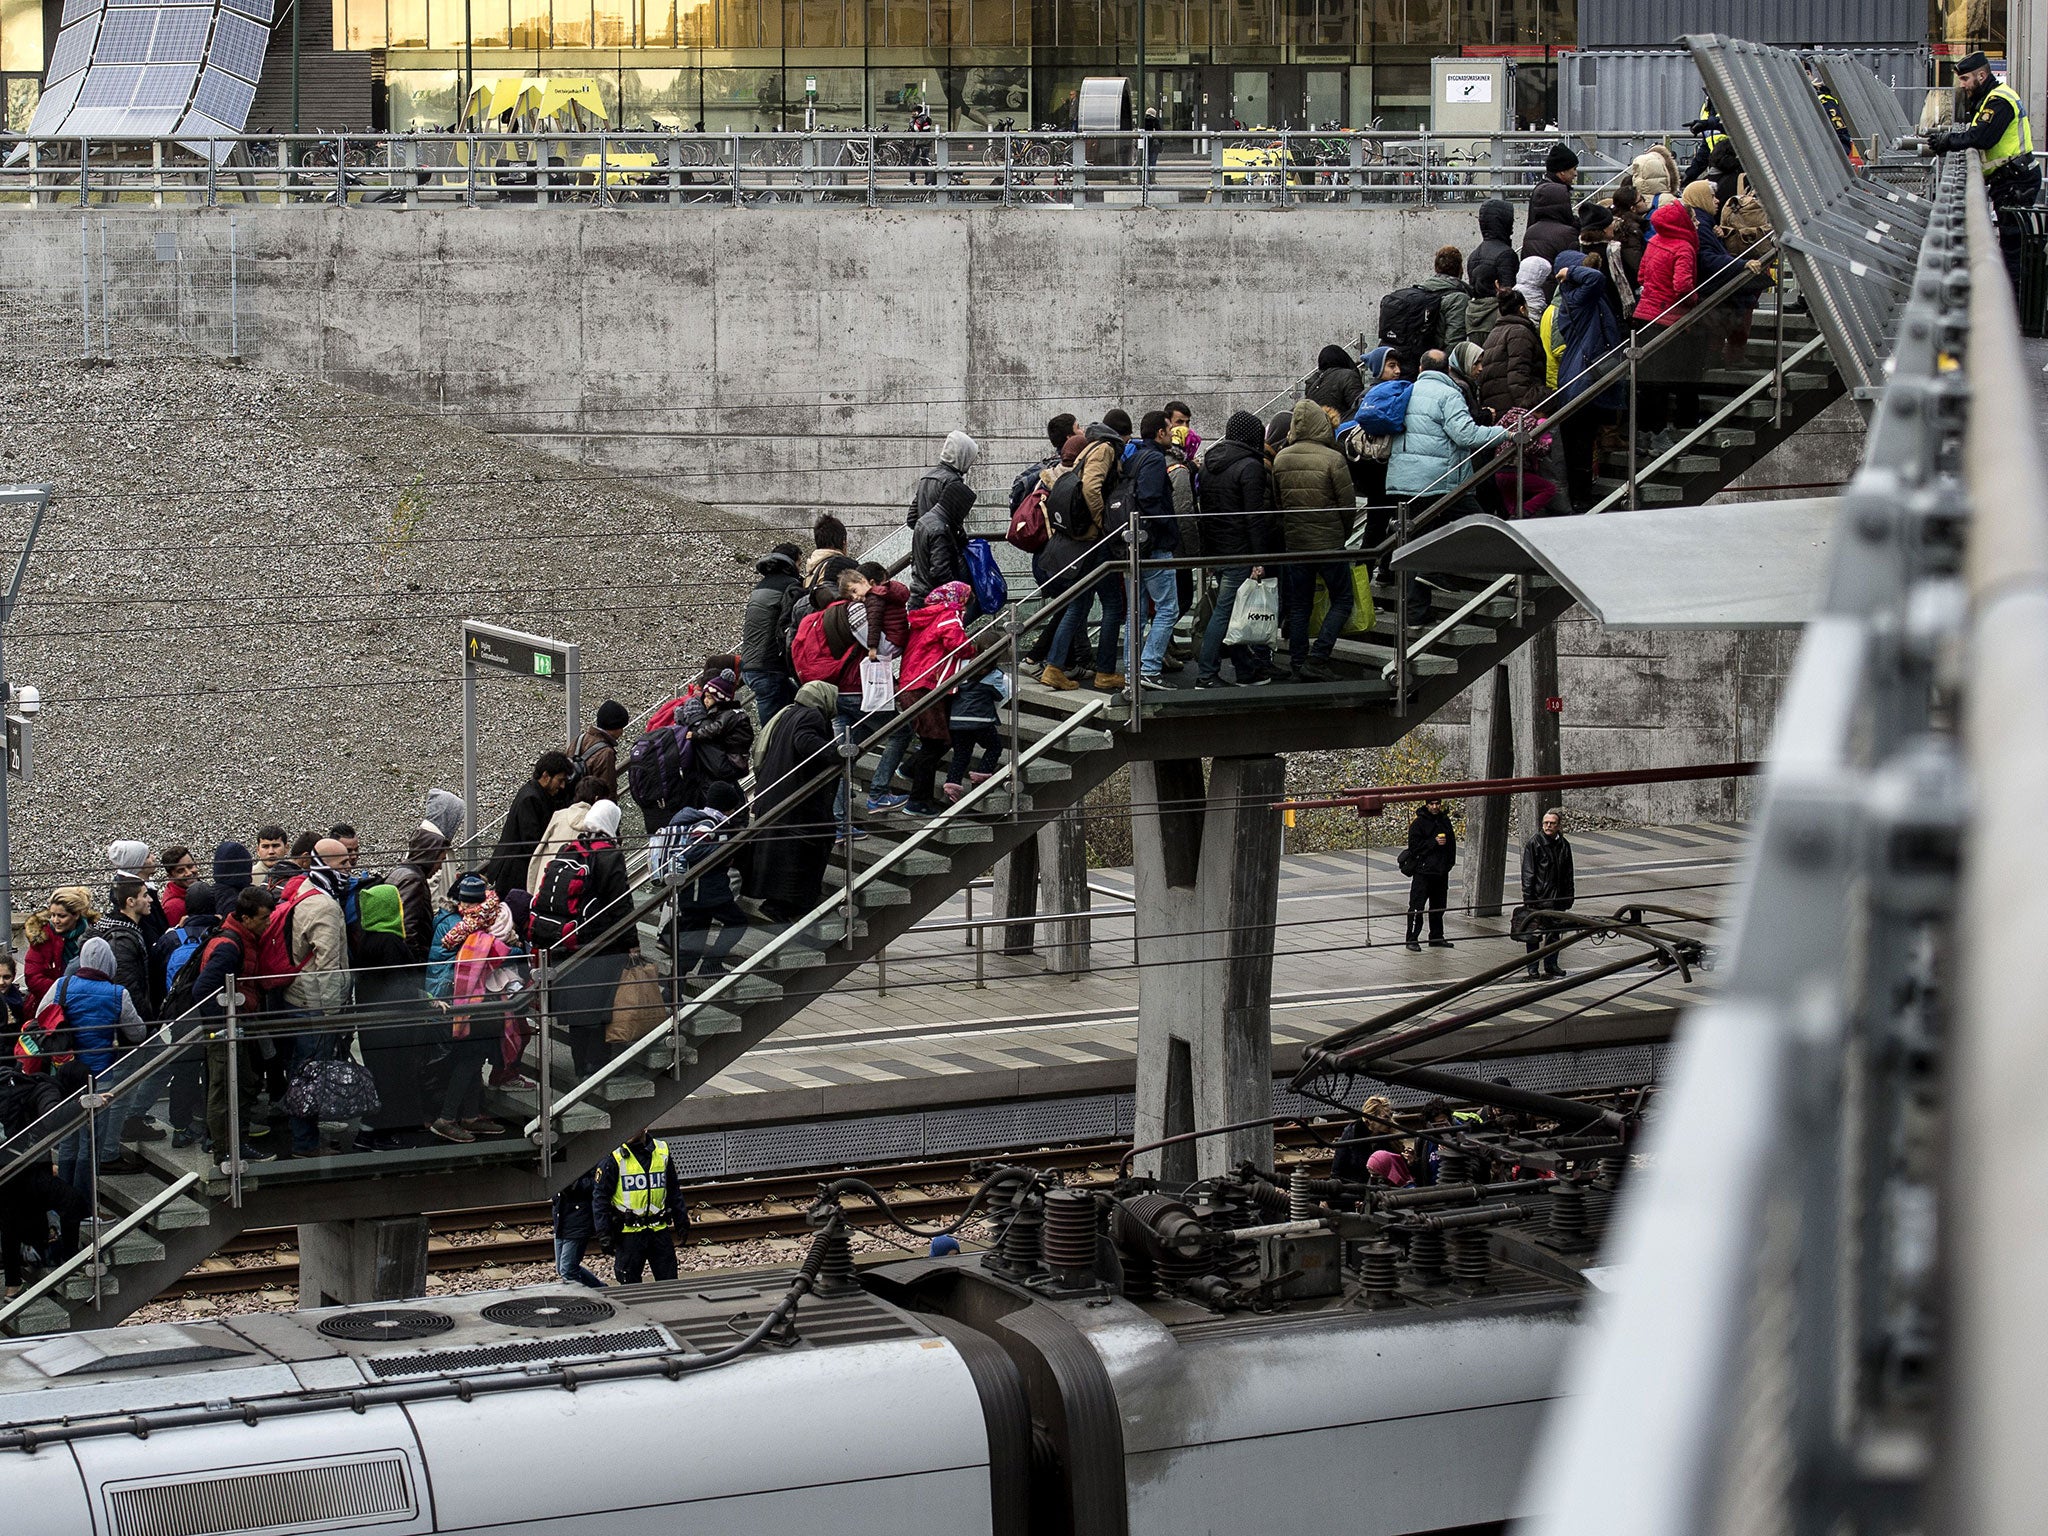 Sweden introduced border controls and identification checks to stem the flow of refugees into the country late last year